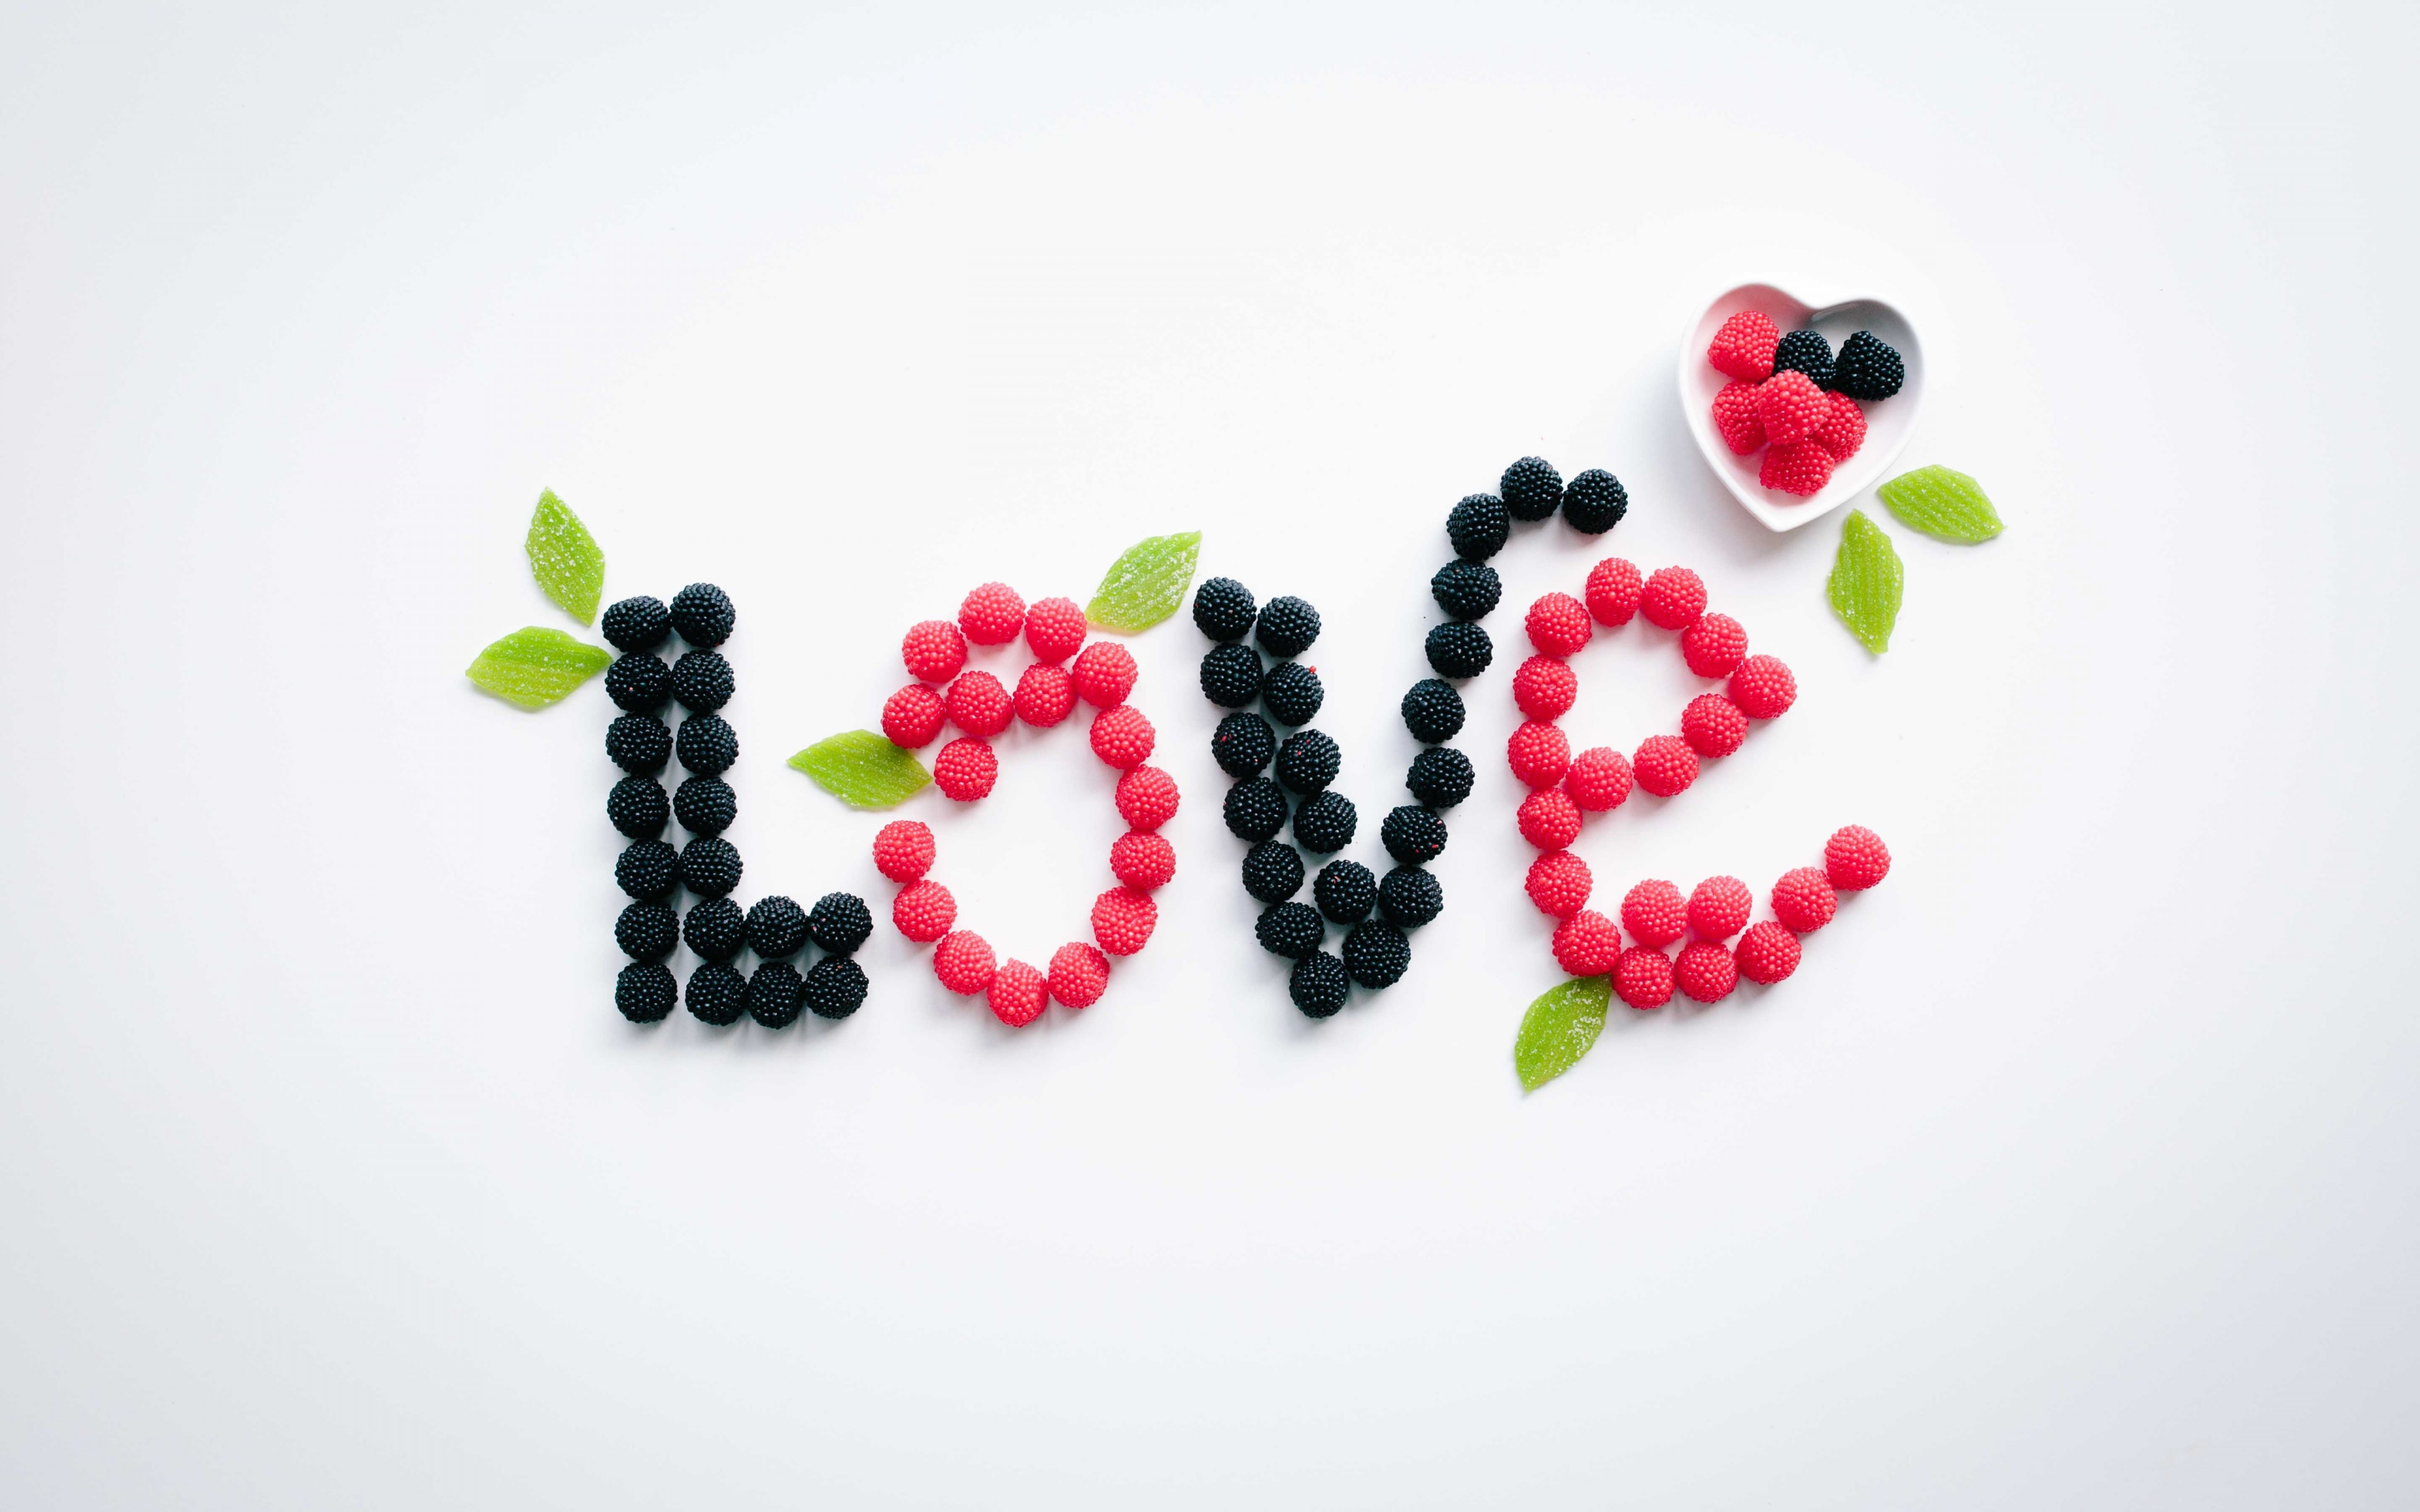 Love message with fruits wallpaper 3840x2400